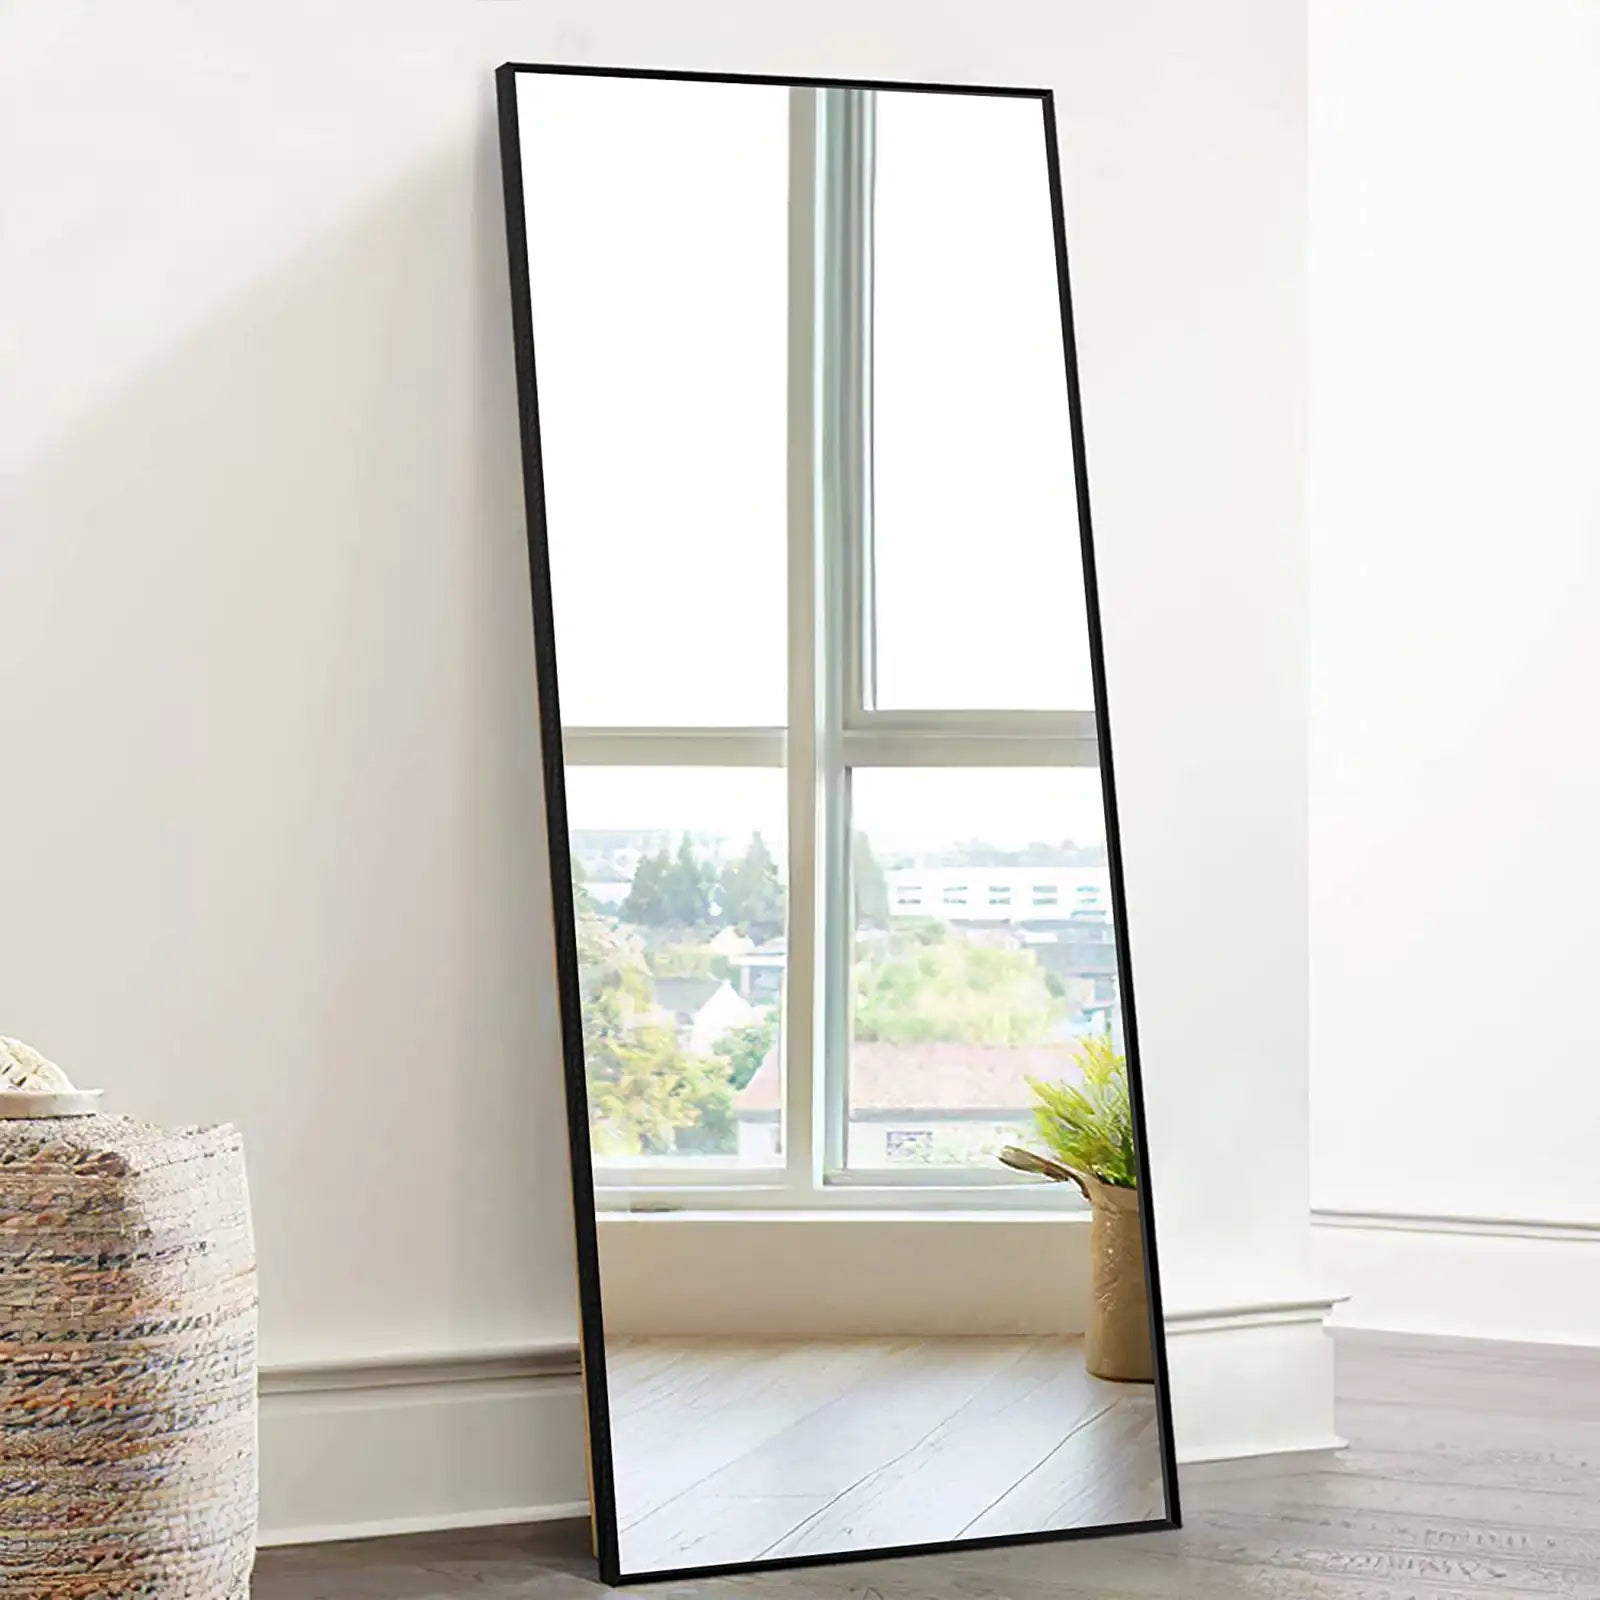 Full Length Mirror Dressing Mirror with Standing Holder 59"x20" or 55"x16" Large Rectangle Bedroom Floor Mirror Wall-Mounted Mirror Hanging Leaning